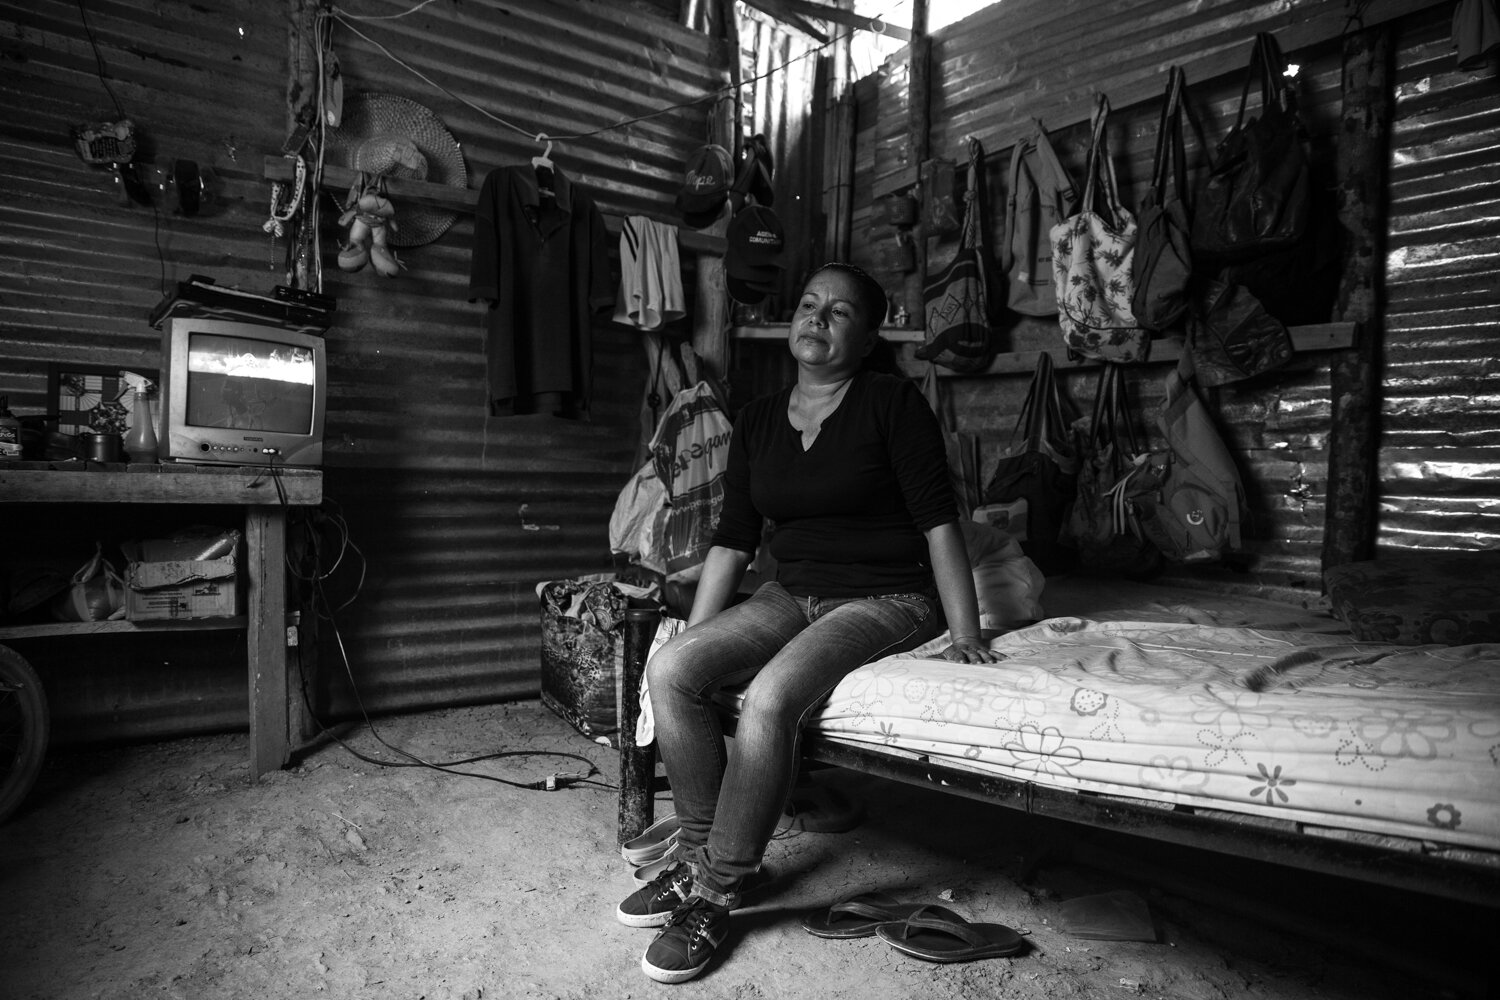  Zoraida Espinosa, 41, sits inside her tin-roofed home, surrounded by personal belongings neatly stacked and arranged.  Over time in Venezuela, the food ran out, the medicine ran out, and she ended up in Alfonso Gómez. “I don’t see the possibility of